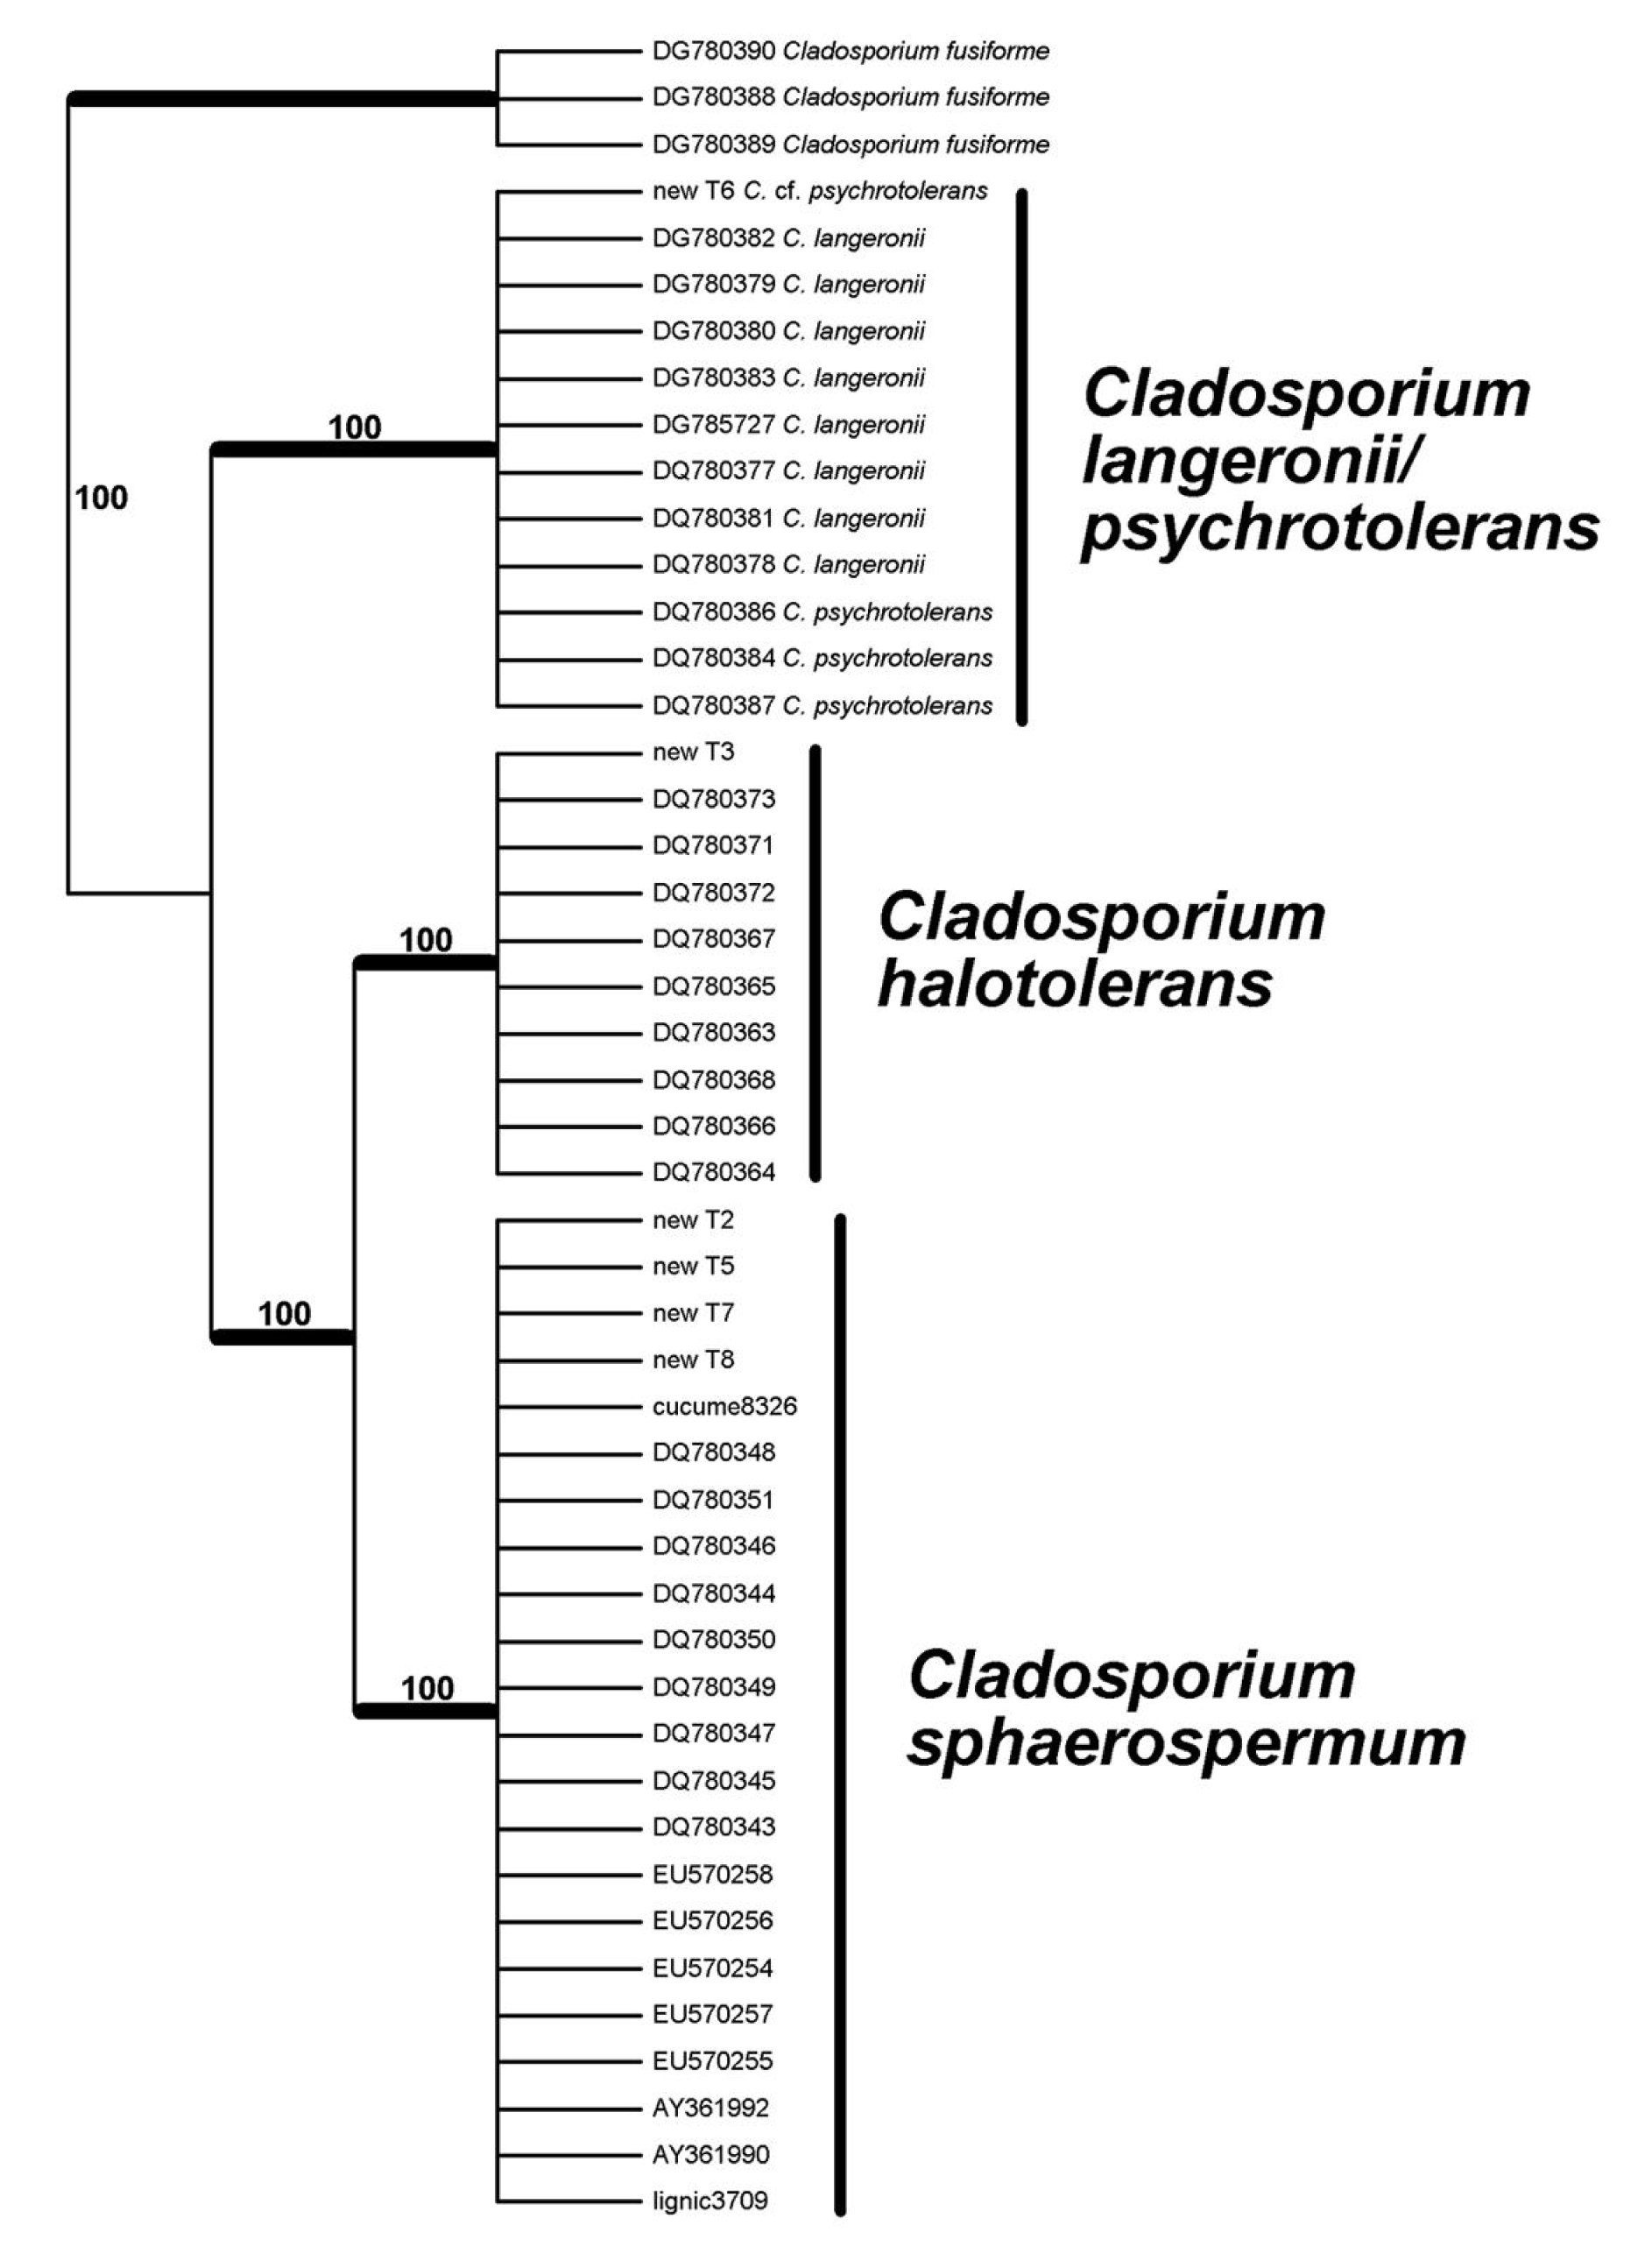 Fig. 1. Phylogenetic tree of the members of the genus Cladosporium after ITS1/UTS2 gene of nuclear DNA.